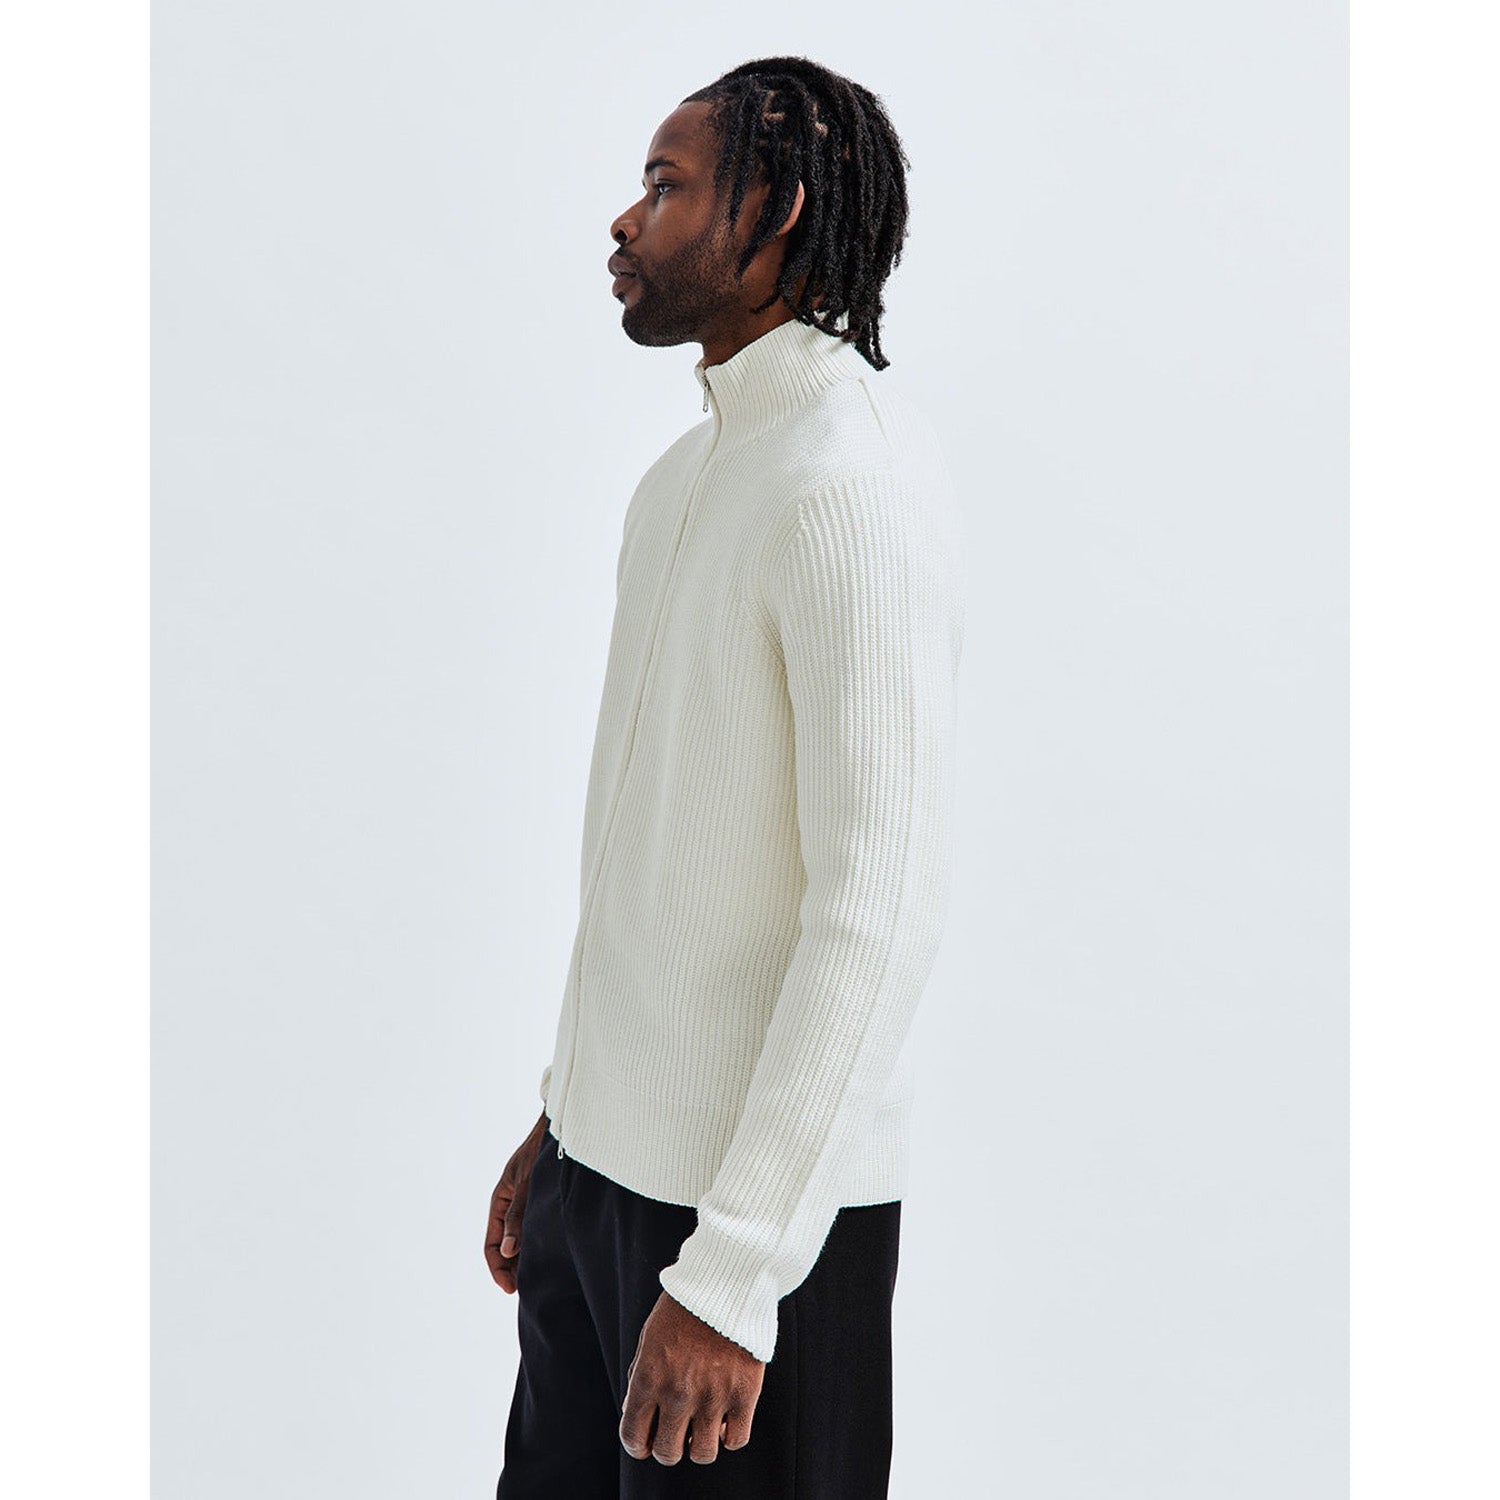 Reigning Champ Men Knit Vinnie Track Jacket Ivory RC-6031-IVO - OUTERWEAR - Canada